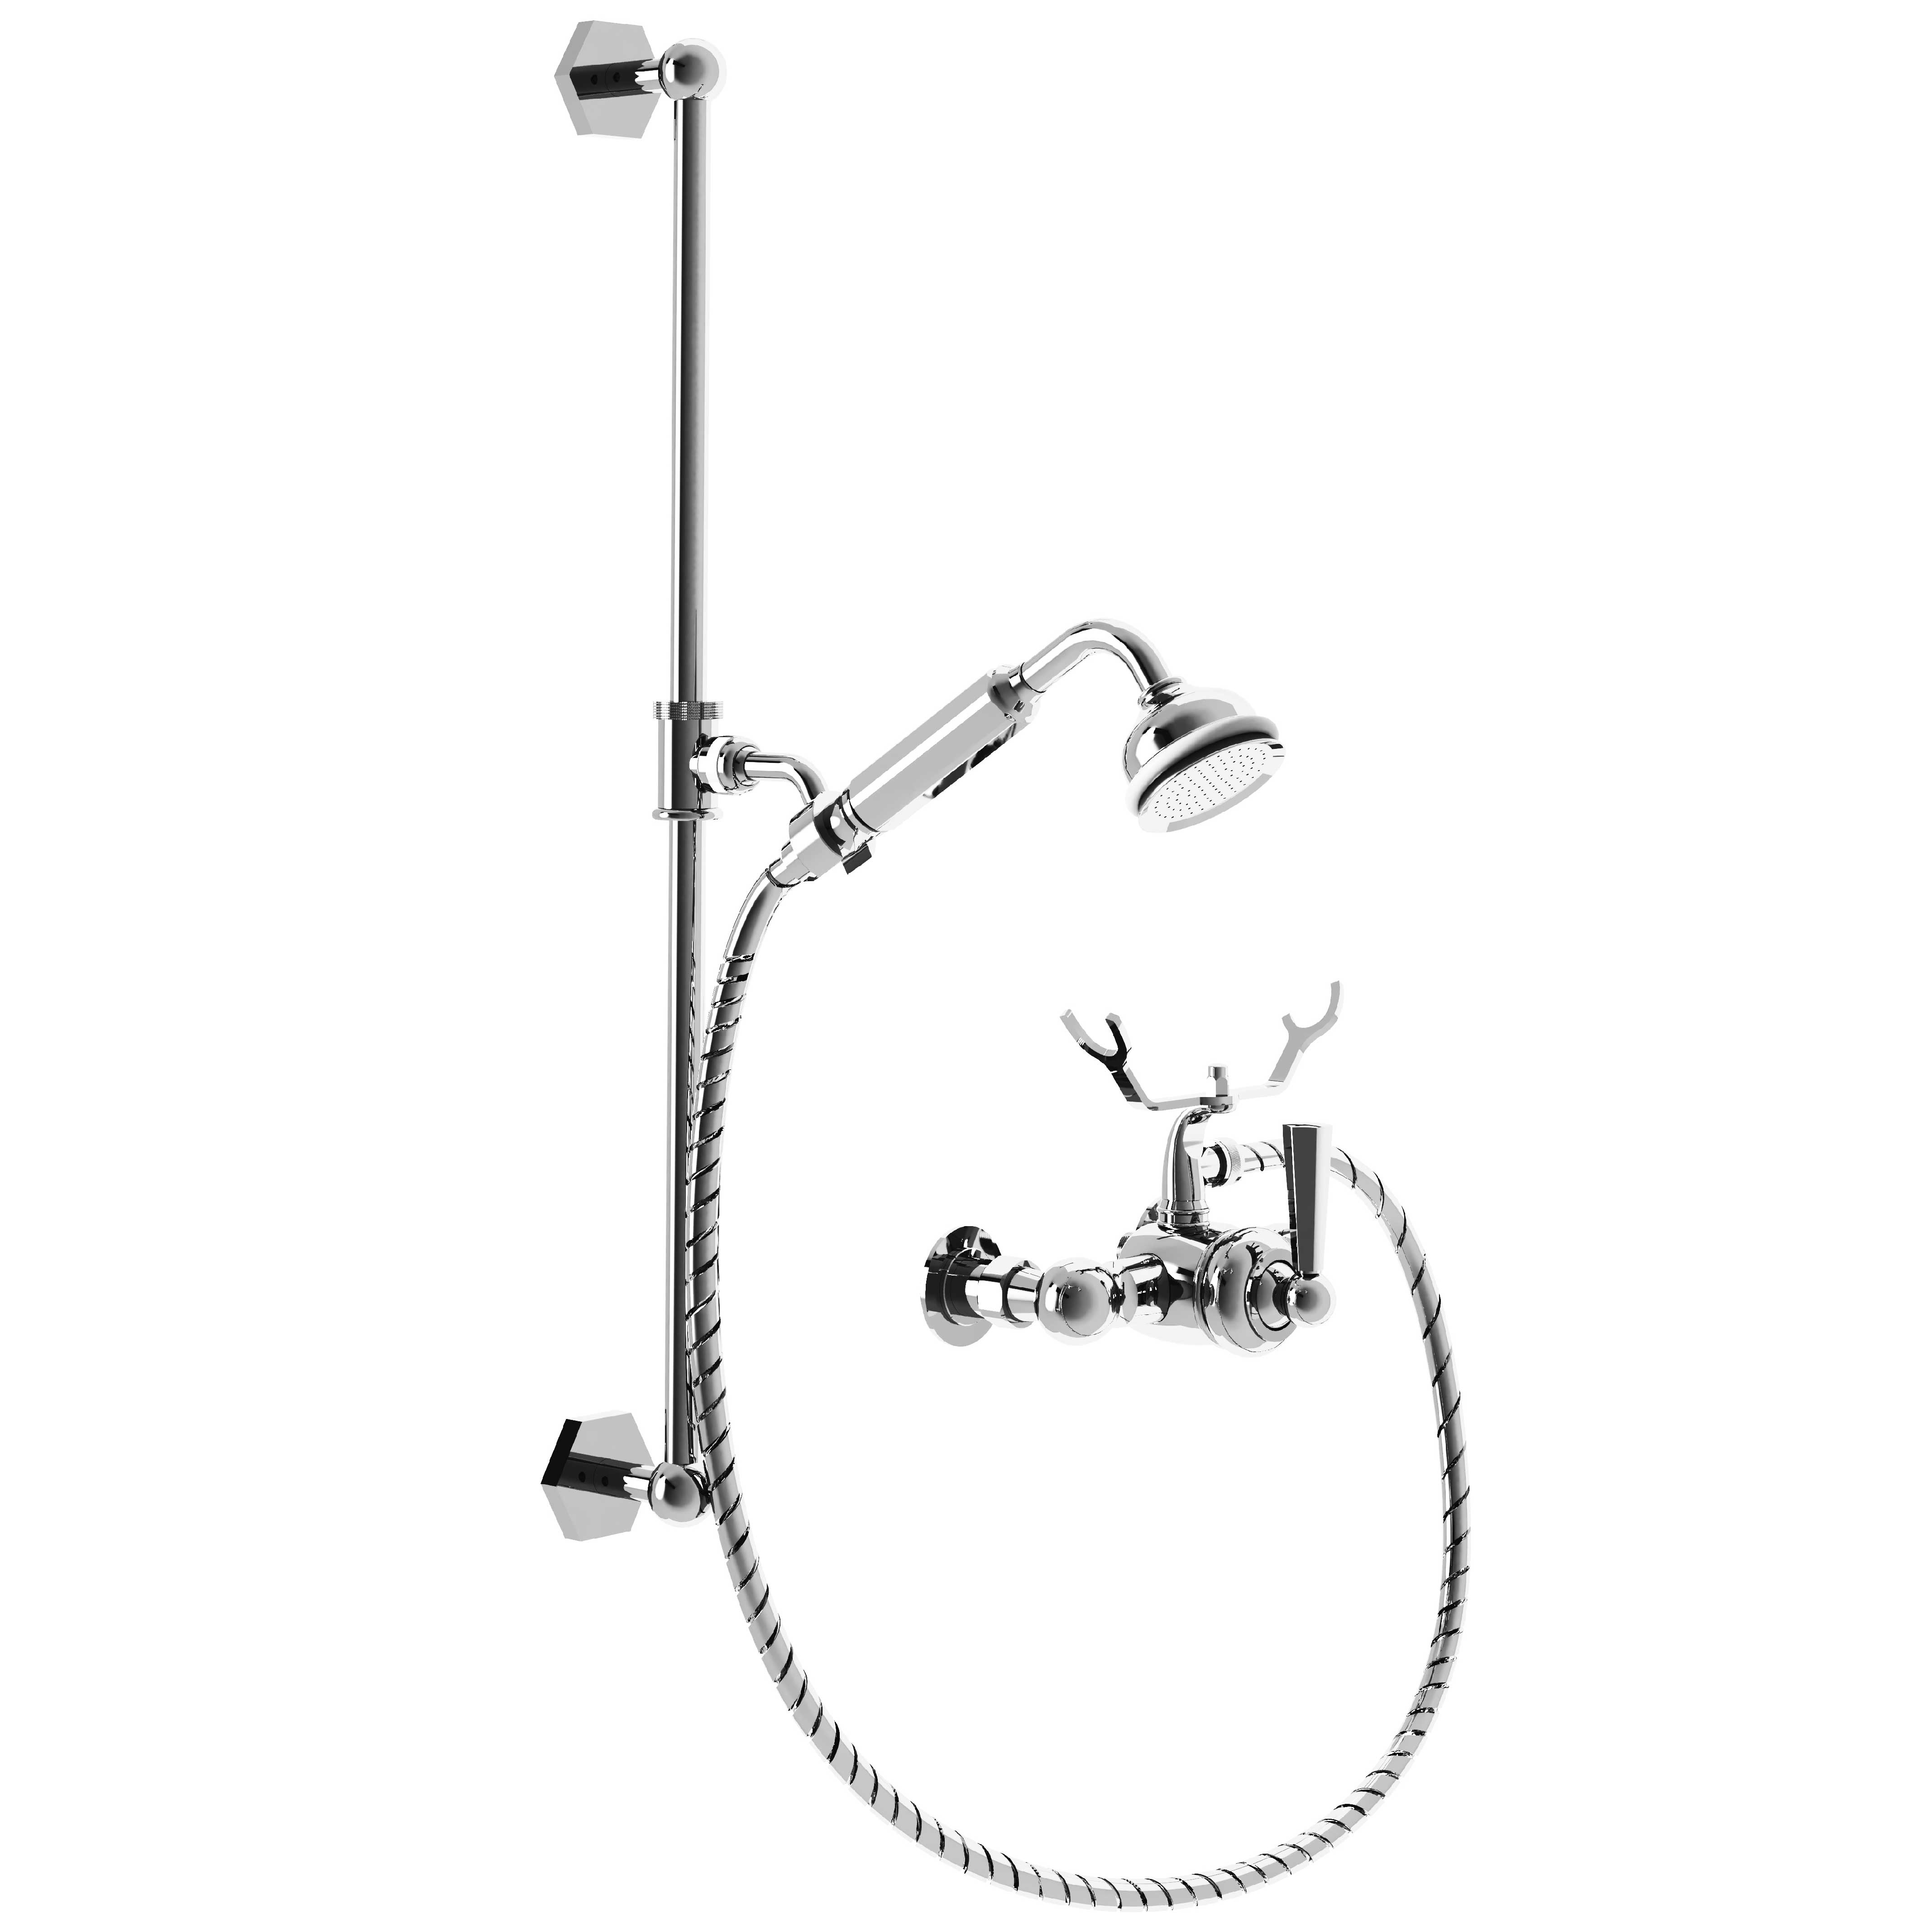 M38-2202M Single-lever shower mixer with sliding bar